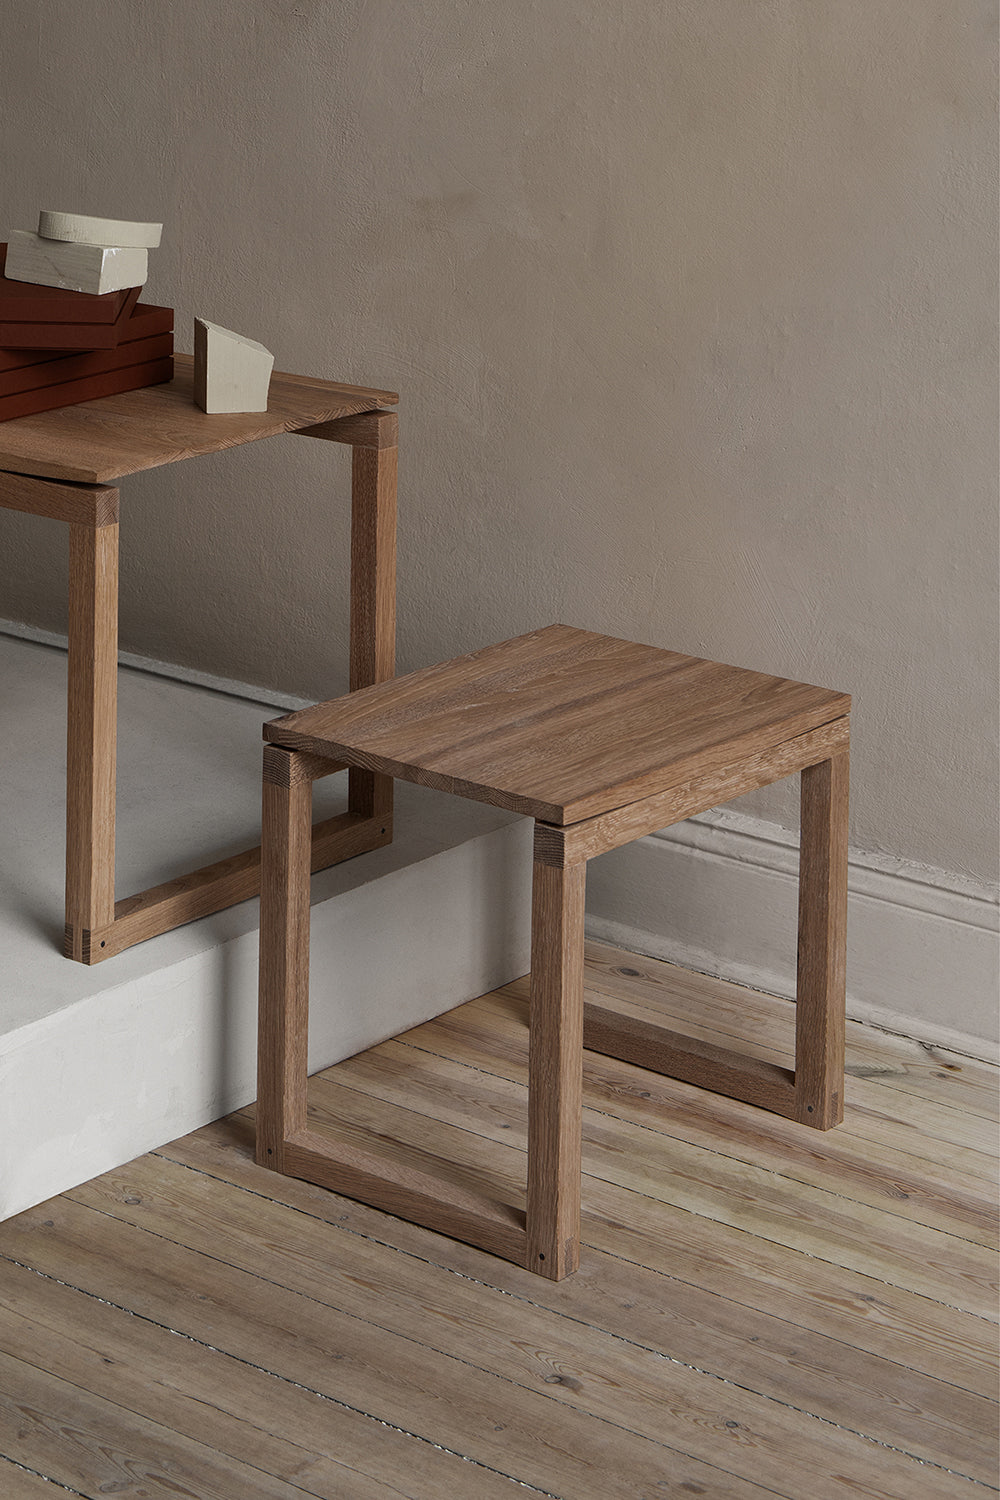 Outline Side Table 05 by Bonni Bonne - an Oak wooden table with Japanese style influence